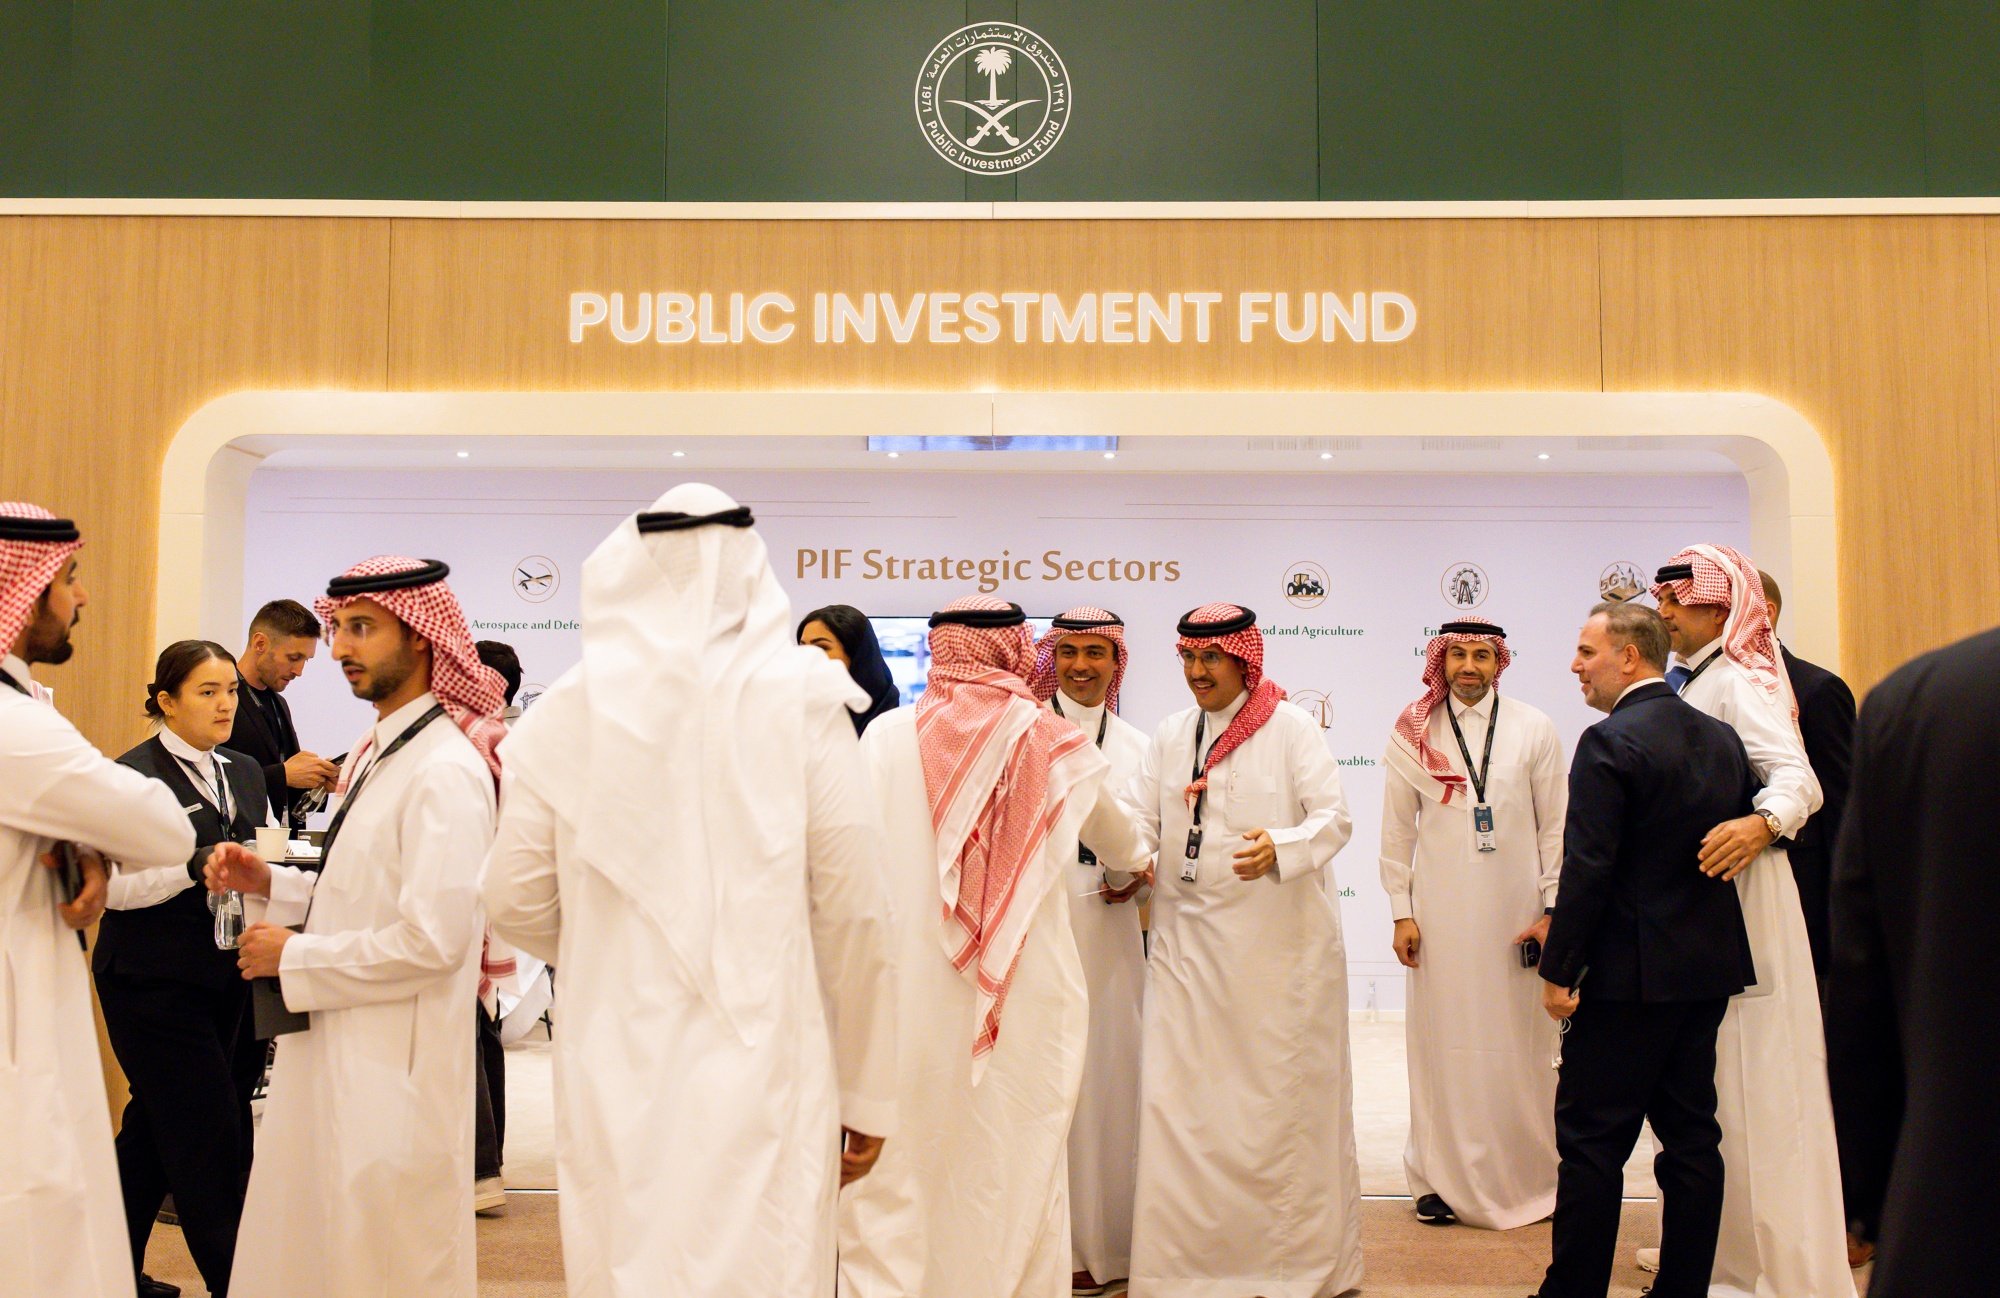 Attendees visit the Public Investment Fund booth at the Future Investment Initiative conference in Riyadh, Saudi Arabia.